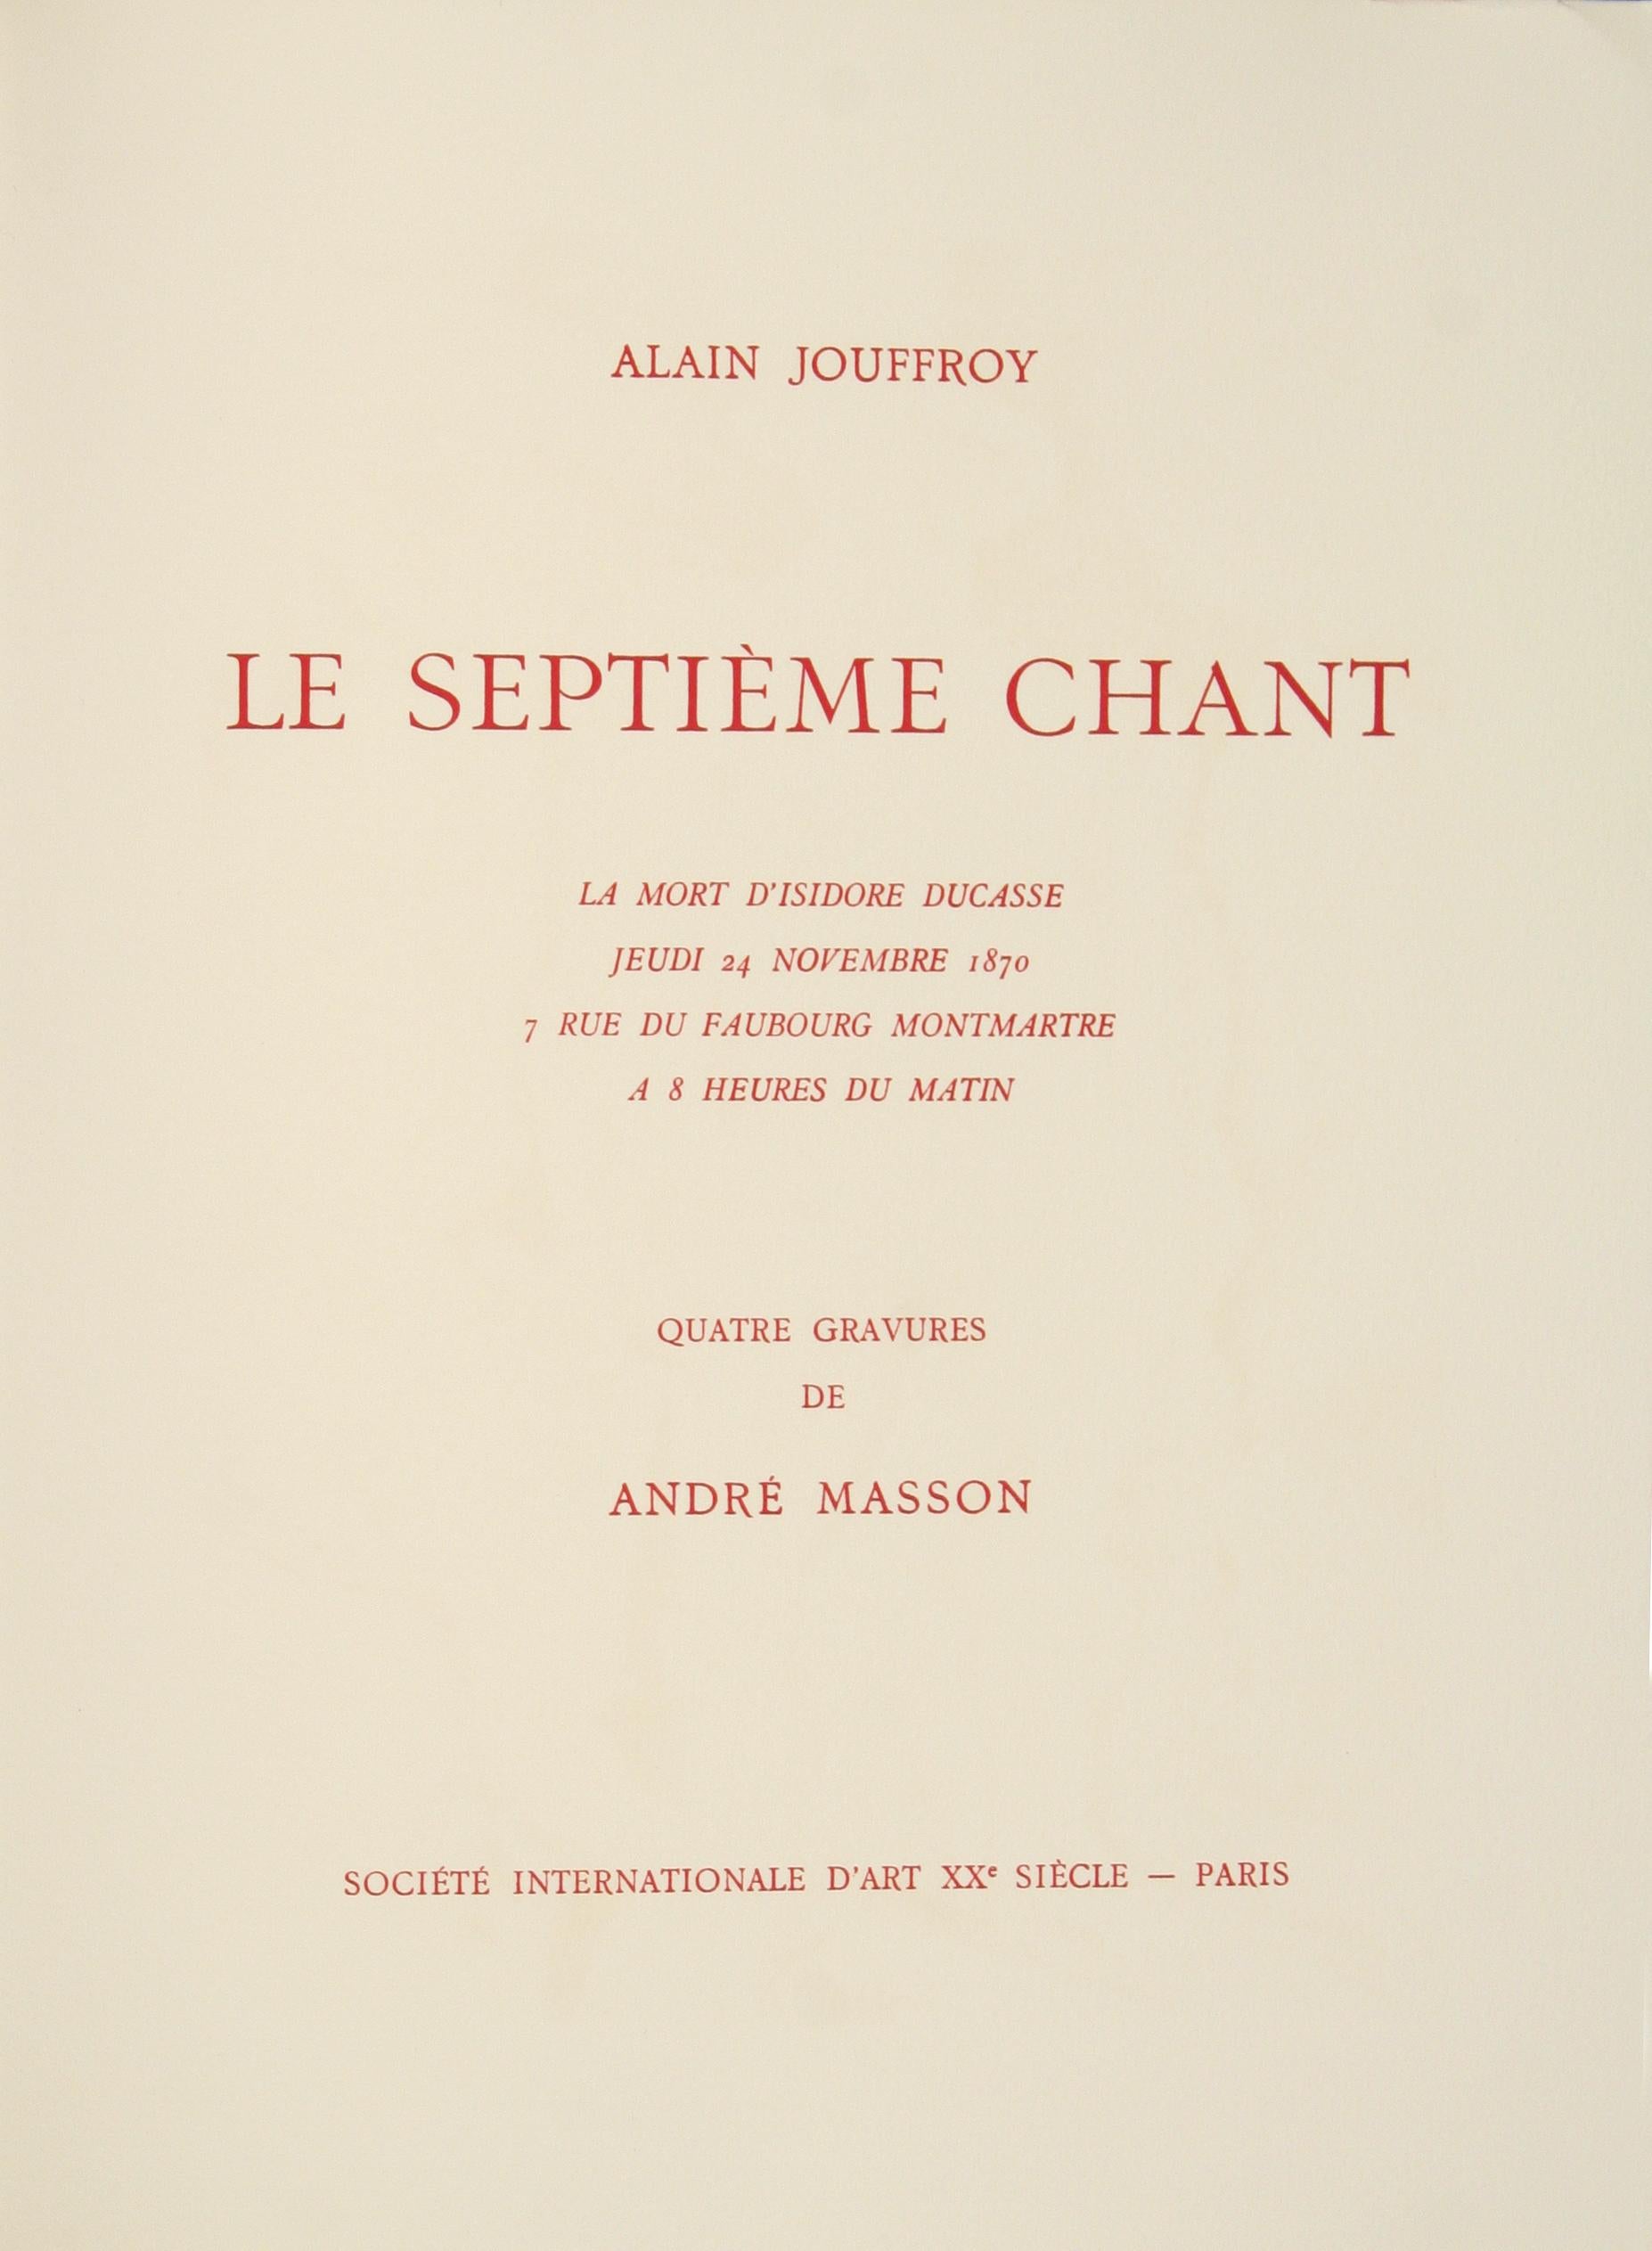 MASSON, André.  Le Septieme Chant.  By Alain Jouffroy.  Illustrated with 4 engravings by Masson.  Folio, loose as issued in the original wrappers and linen-covered slipcase, preserved in a cloth folding box.  Paris: Société Internationale d'art XXe